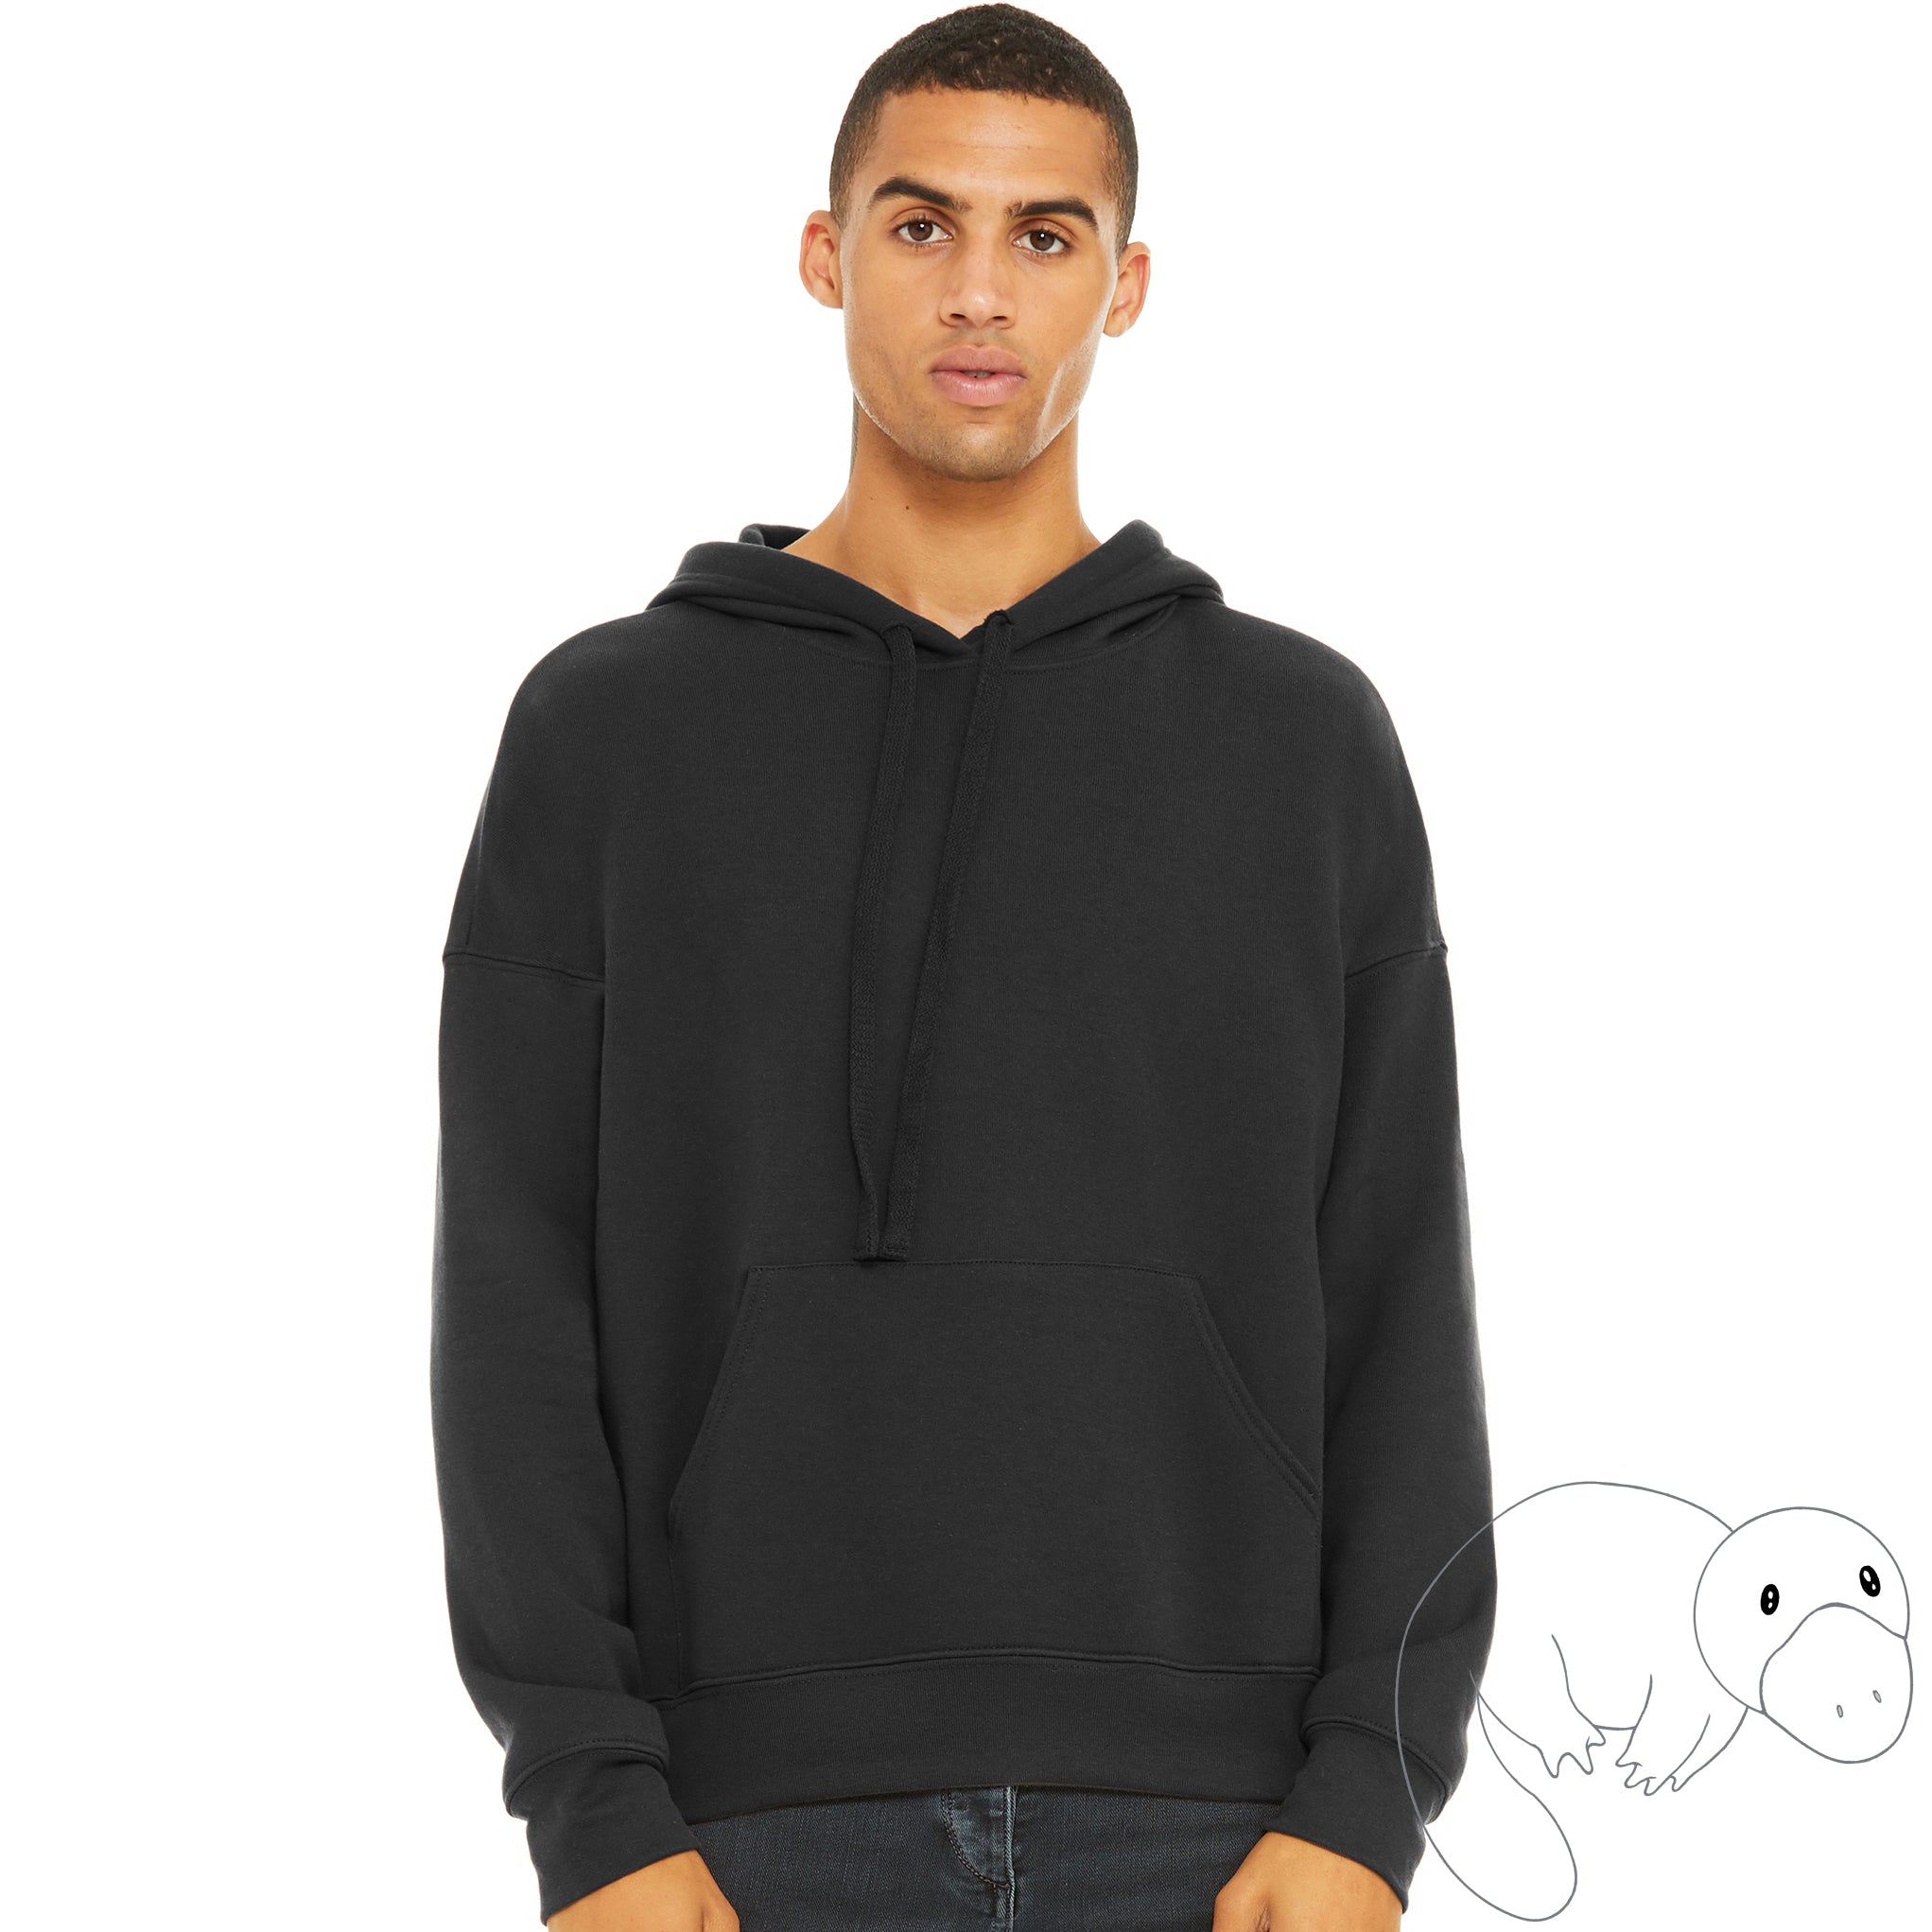 new-product-soft-sweatshirt-cozy-warm-dark-grey-black-hoodie-face-mask-Plats-Hoodie-facemask-all-in-one-convertible-plats-hoodie-platinum-platypus-guy-millennial-boy-man-beautiful-eyes-blue-green-young-cute